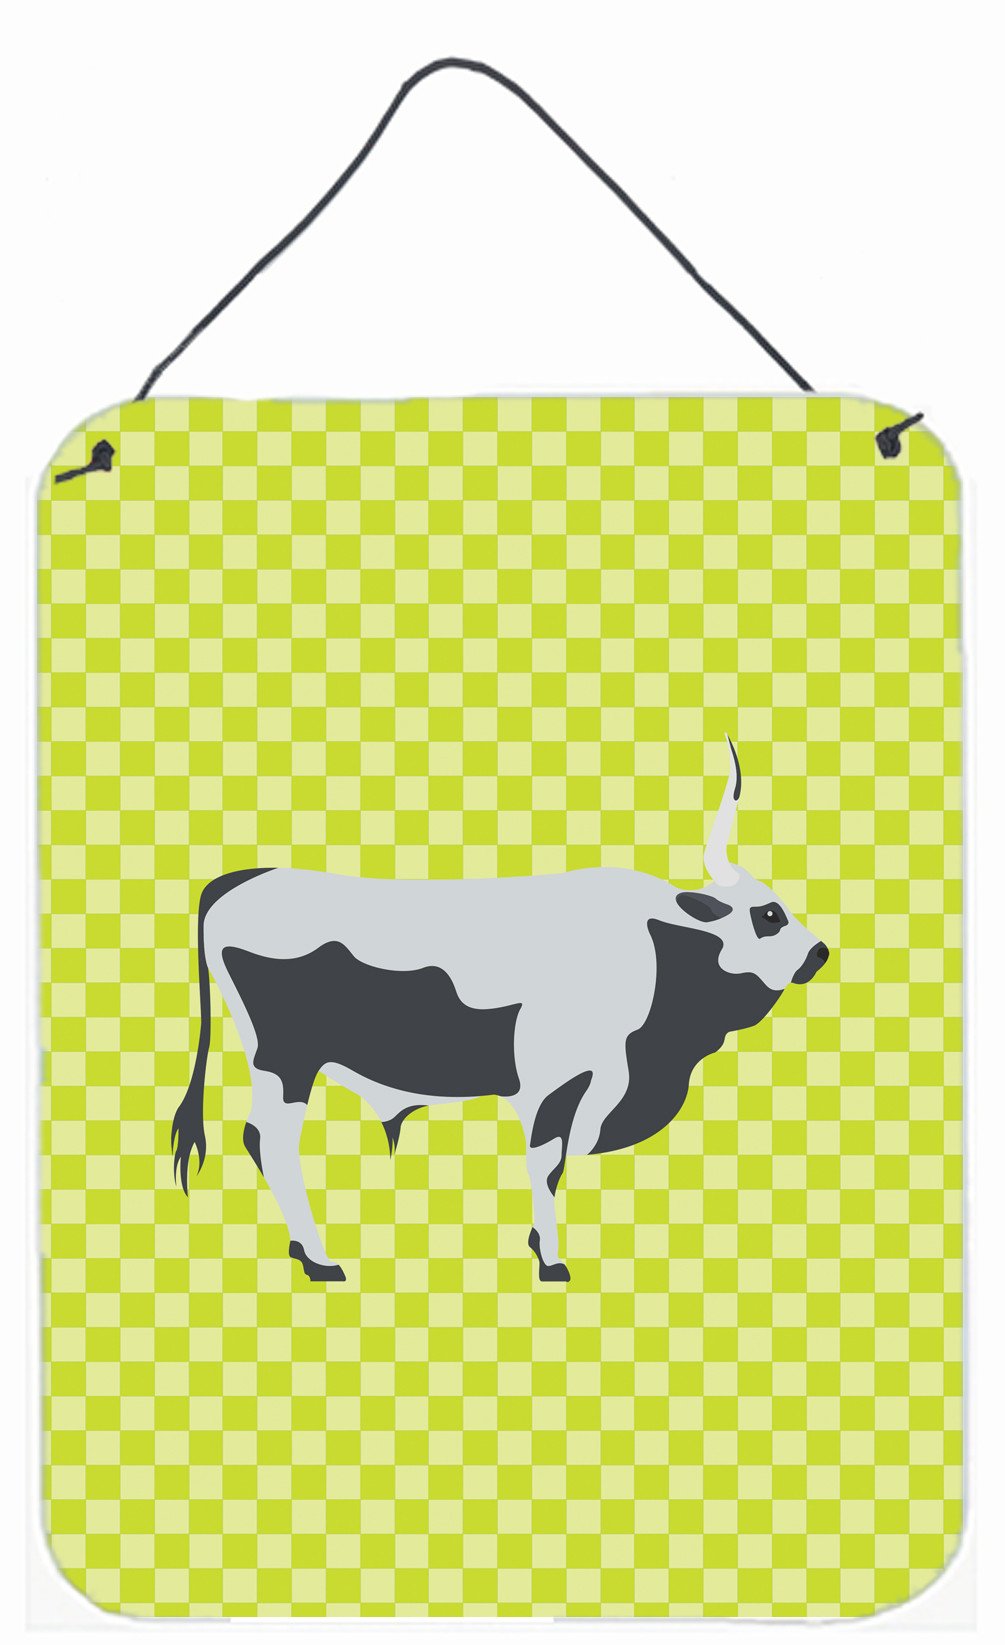 Hungarian Grey Steppe Cow Green Wall or Door Hanging Prints BB7650DS1216 by Caroline's Treasures